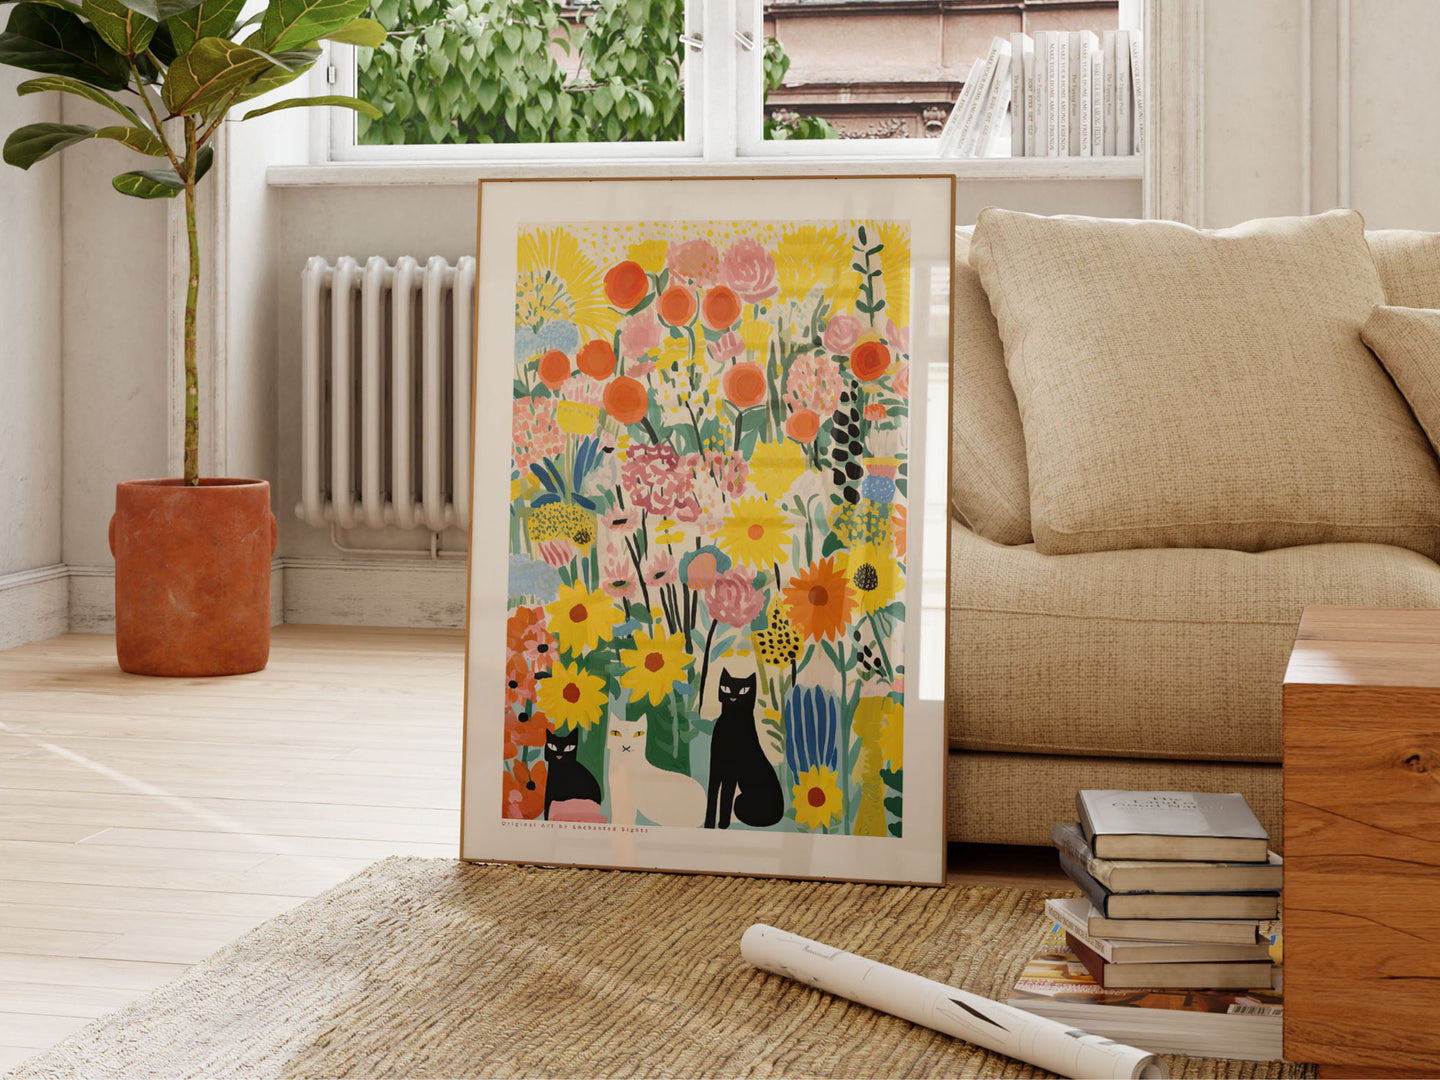 Cat in Garden, Flowers and Cats, Yellow Wall Art, Flower Art Print, Cat Art Print, Cat Illustration, Floral Wall Decor, Gifts for Cat Lovers